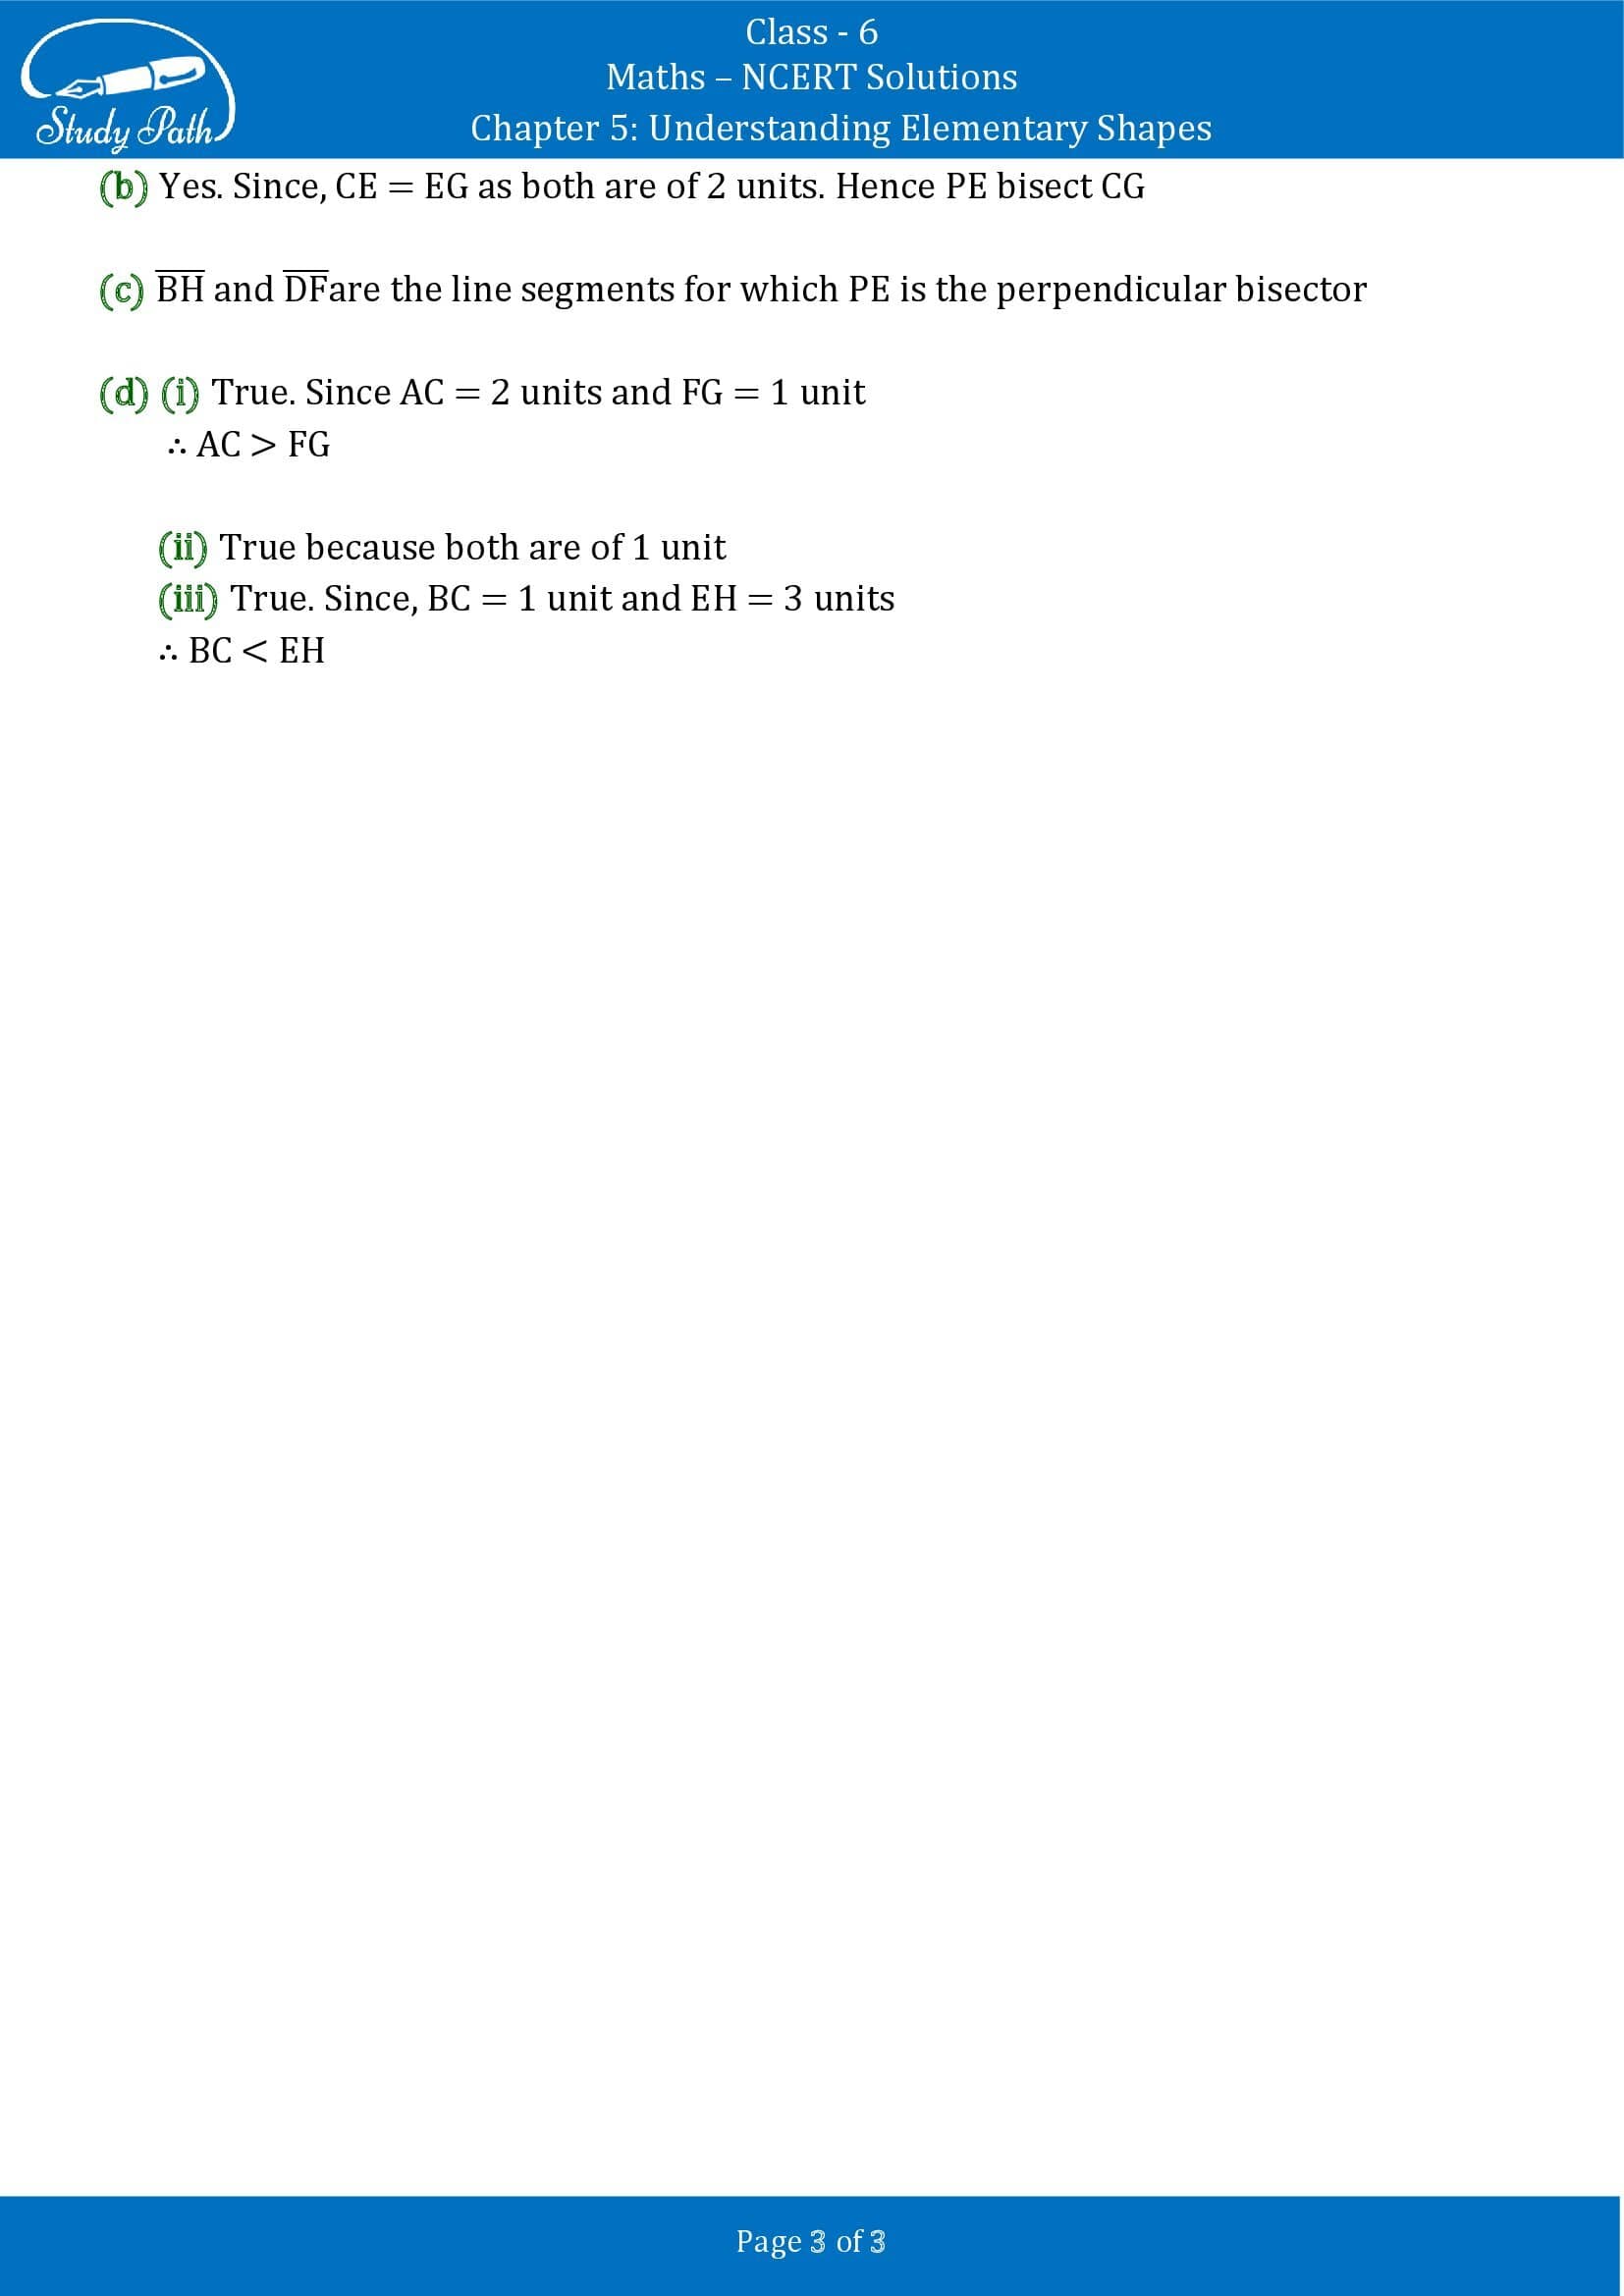 NCERT Solutions for Class 6 Maths Chapter 5 Understanding Elementary Shapes Exercise 5.5 00003